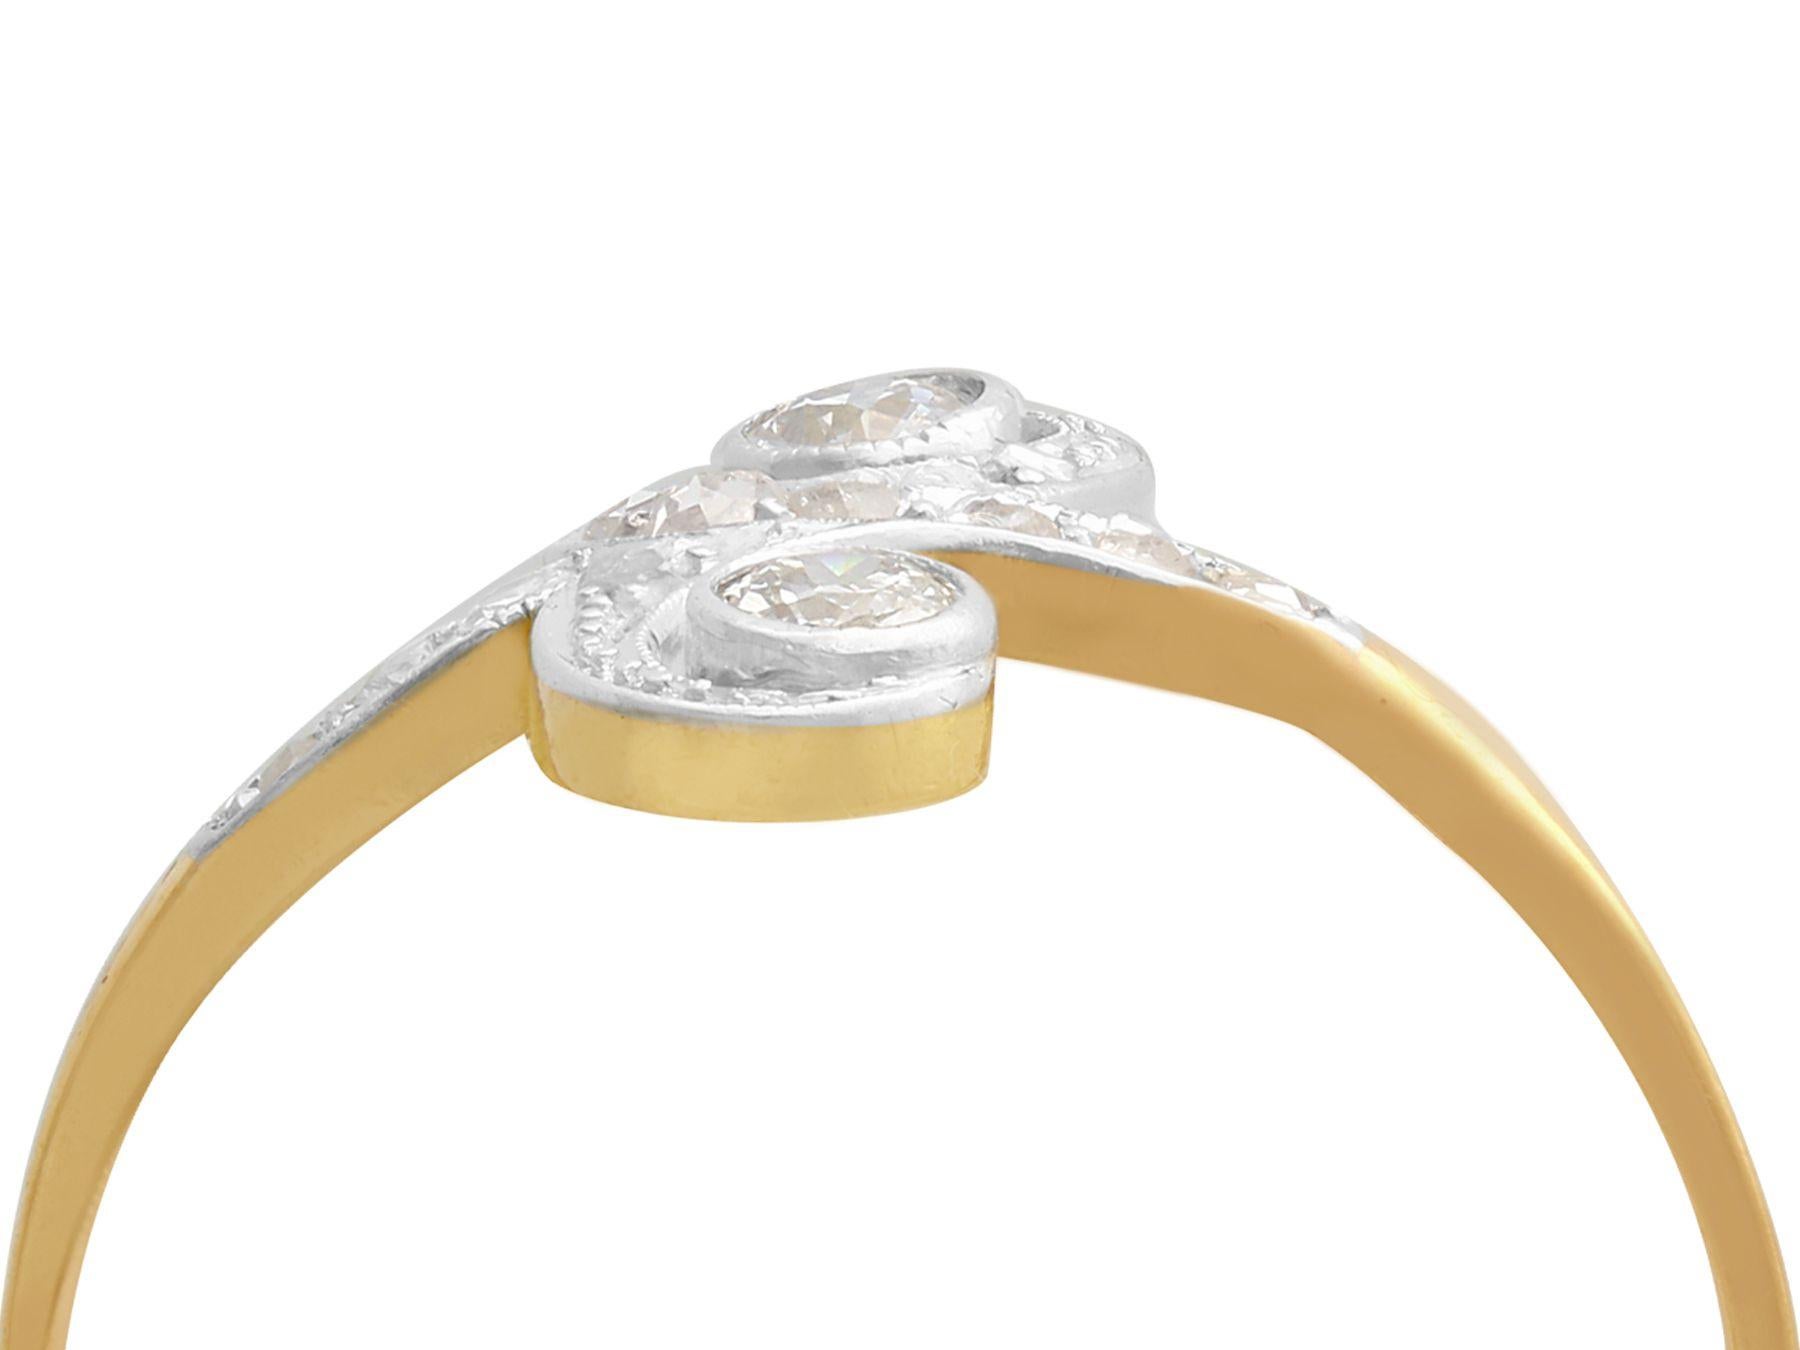 A fine and impressive 0.26 carat diamond and 18 karat yellow gold, 18 karat white gold twist style cocktail ring; part of our diverse antique jewelry and estate jewelry collections.

This fine and impressive multi diamond ring has been crafted in